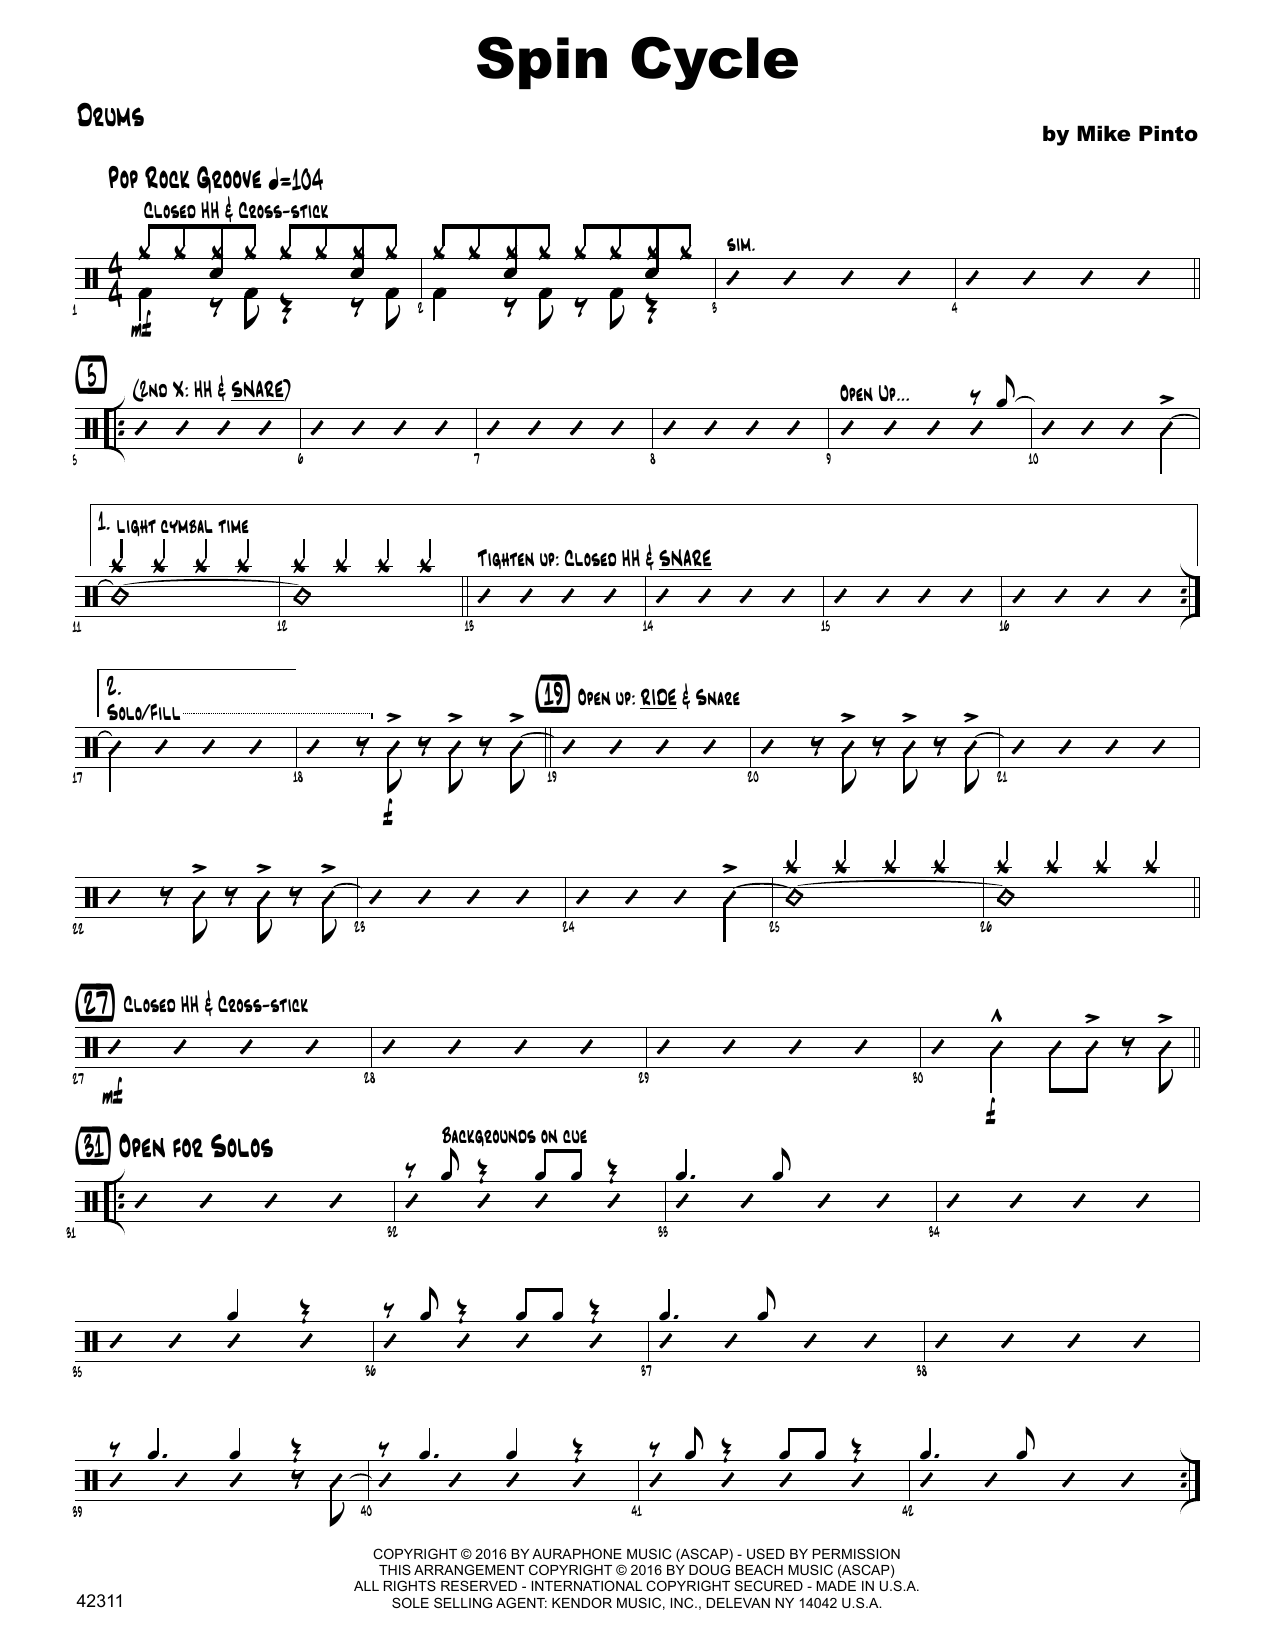 Download Mike Pinto Spin Cycle - Drum Set Sheet Music